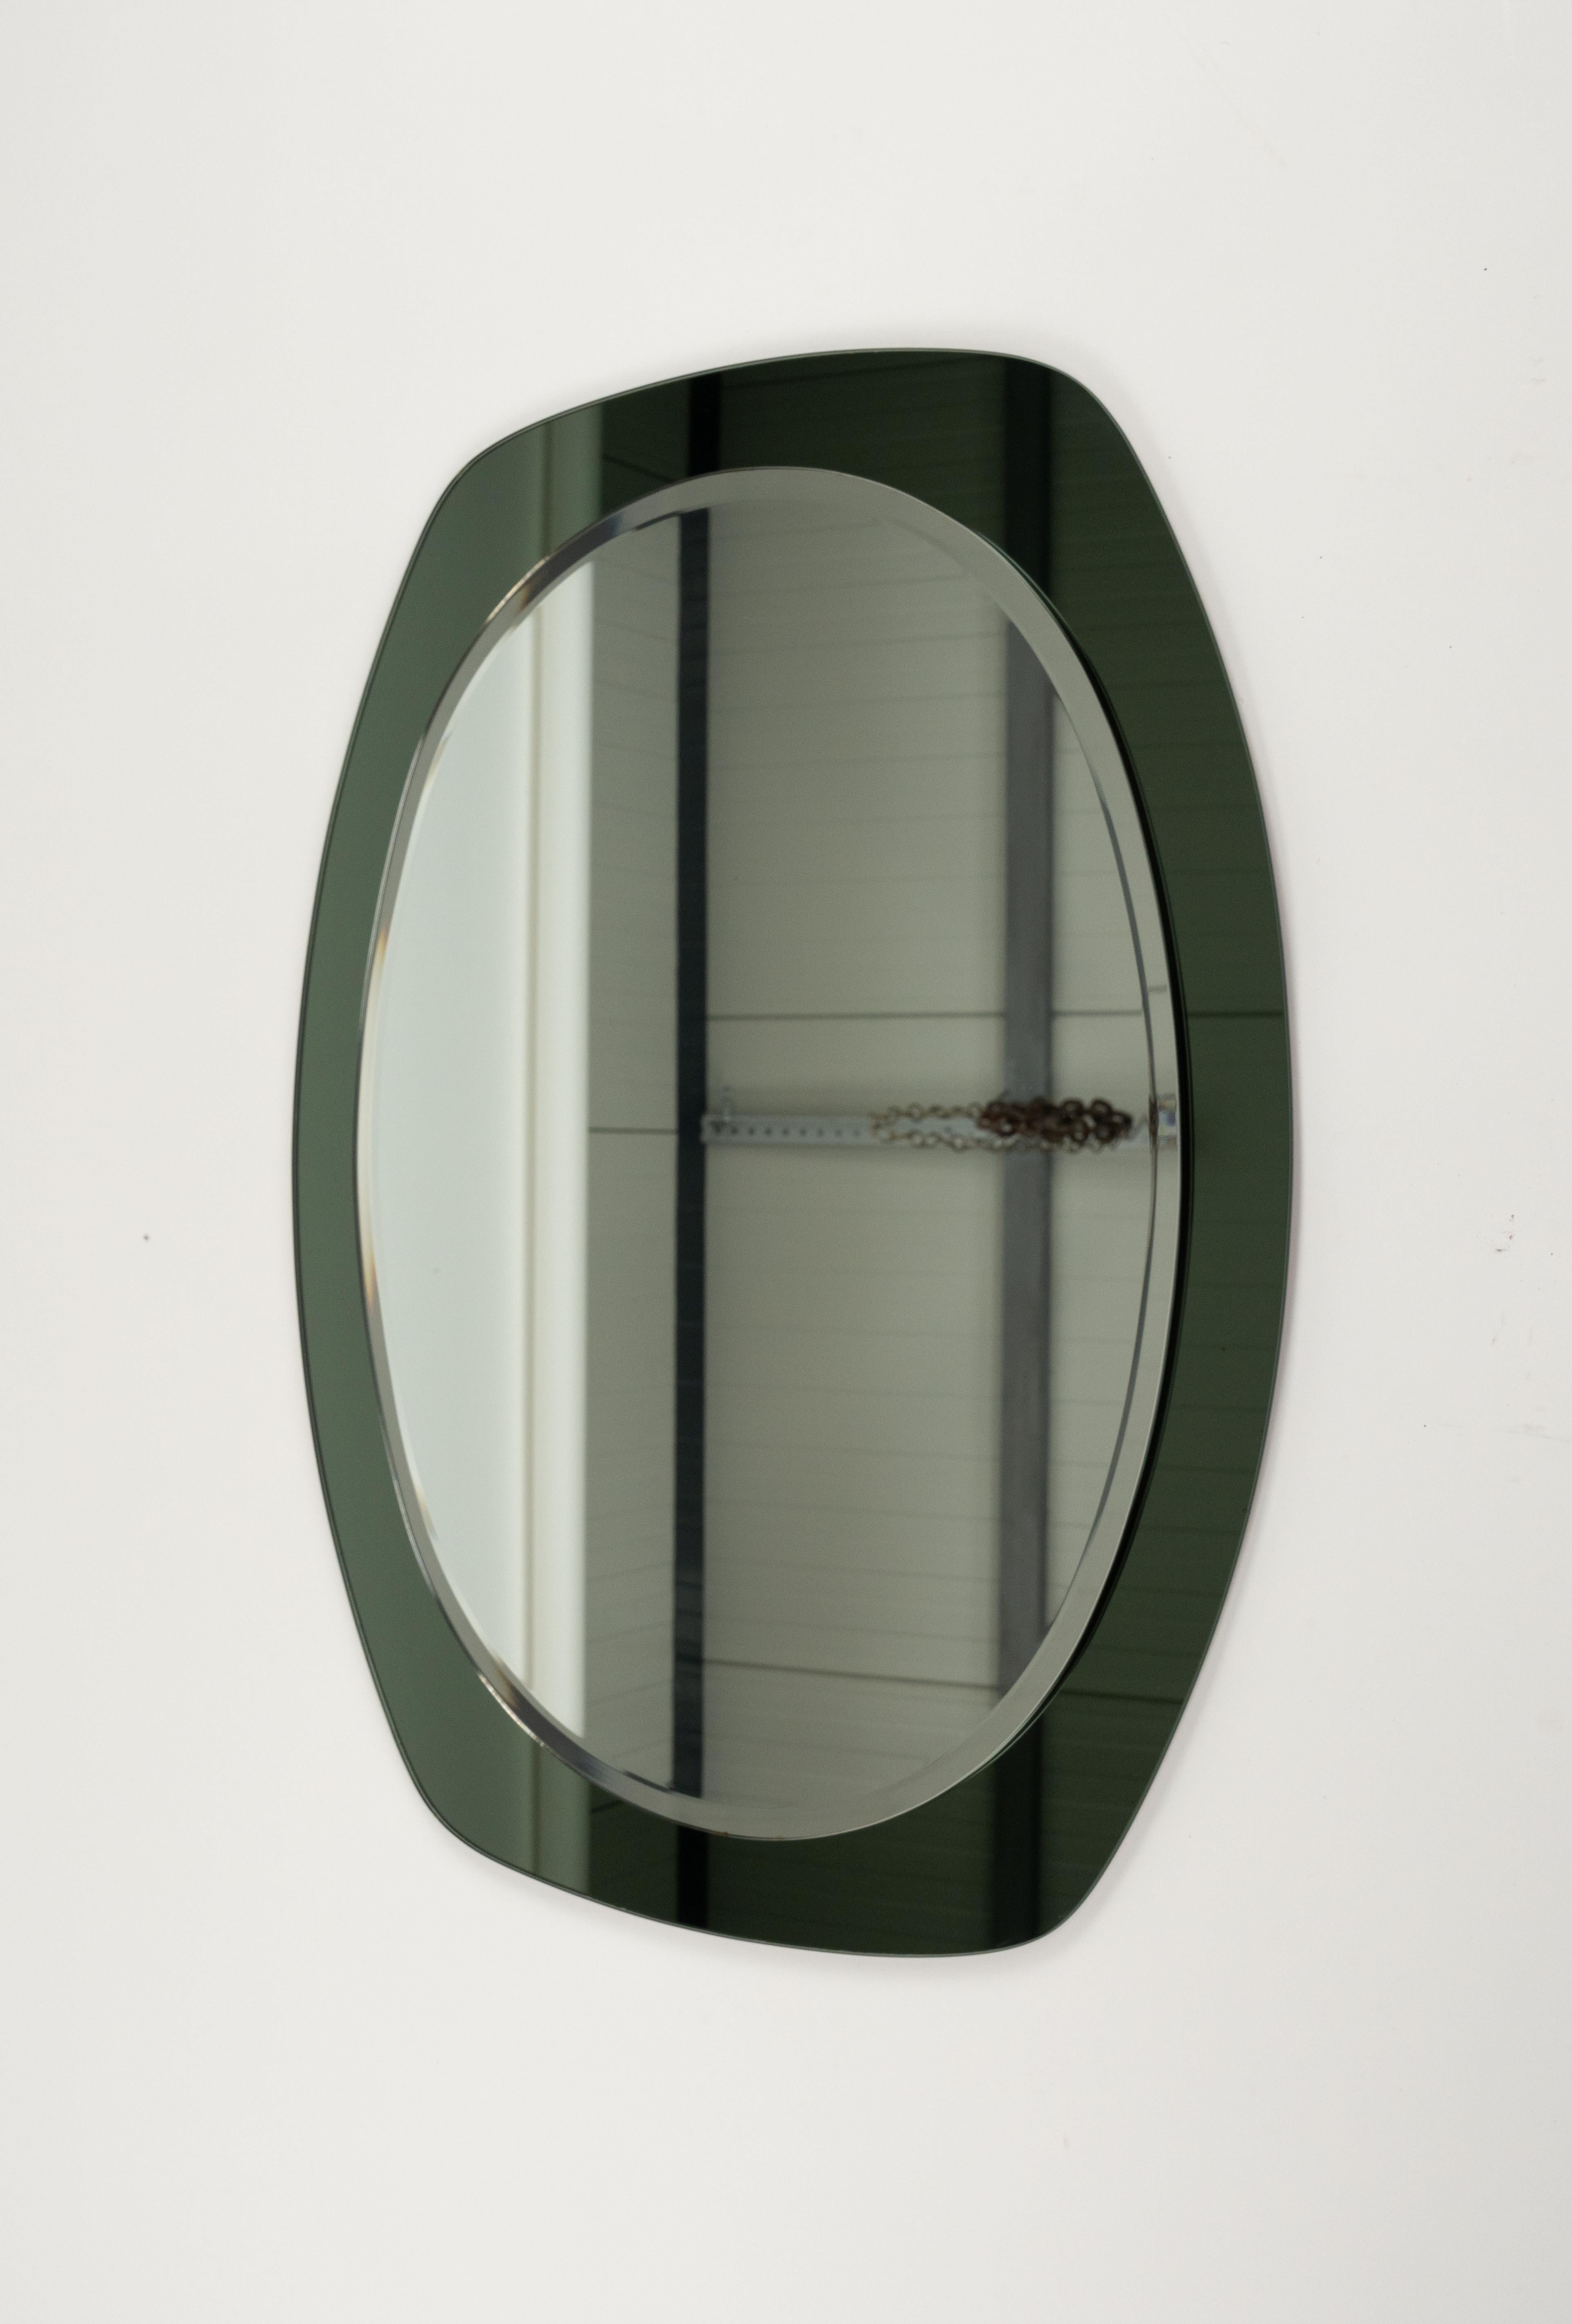 Midcentury Cristal Art Oval Wall Mirror with Green Frame, Italy 1960s In Good Condition For Sale In Rome, IT